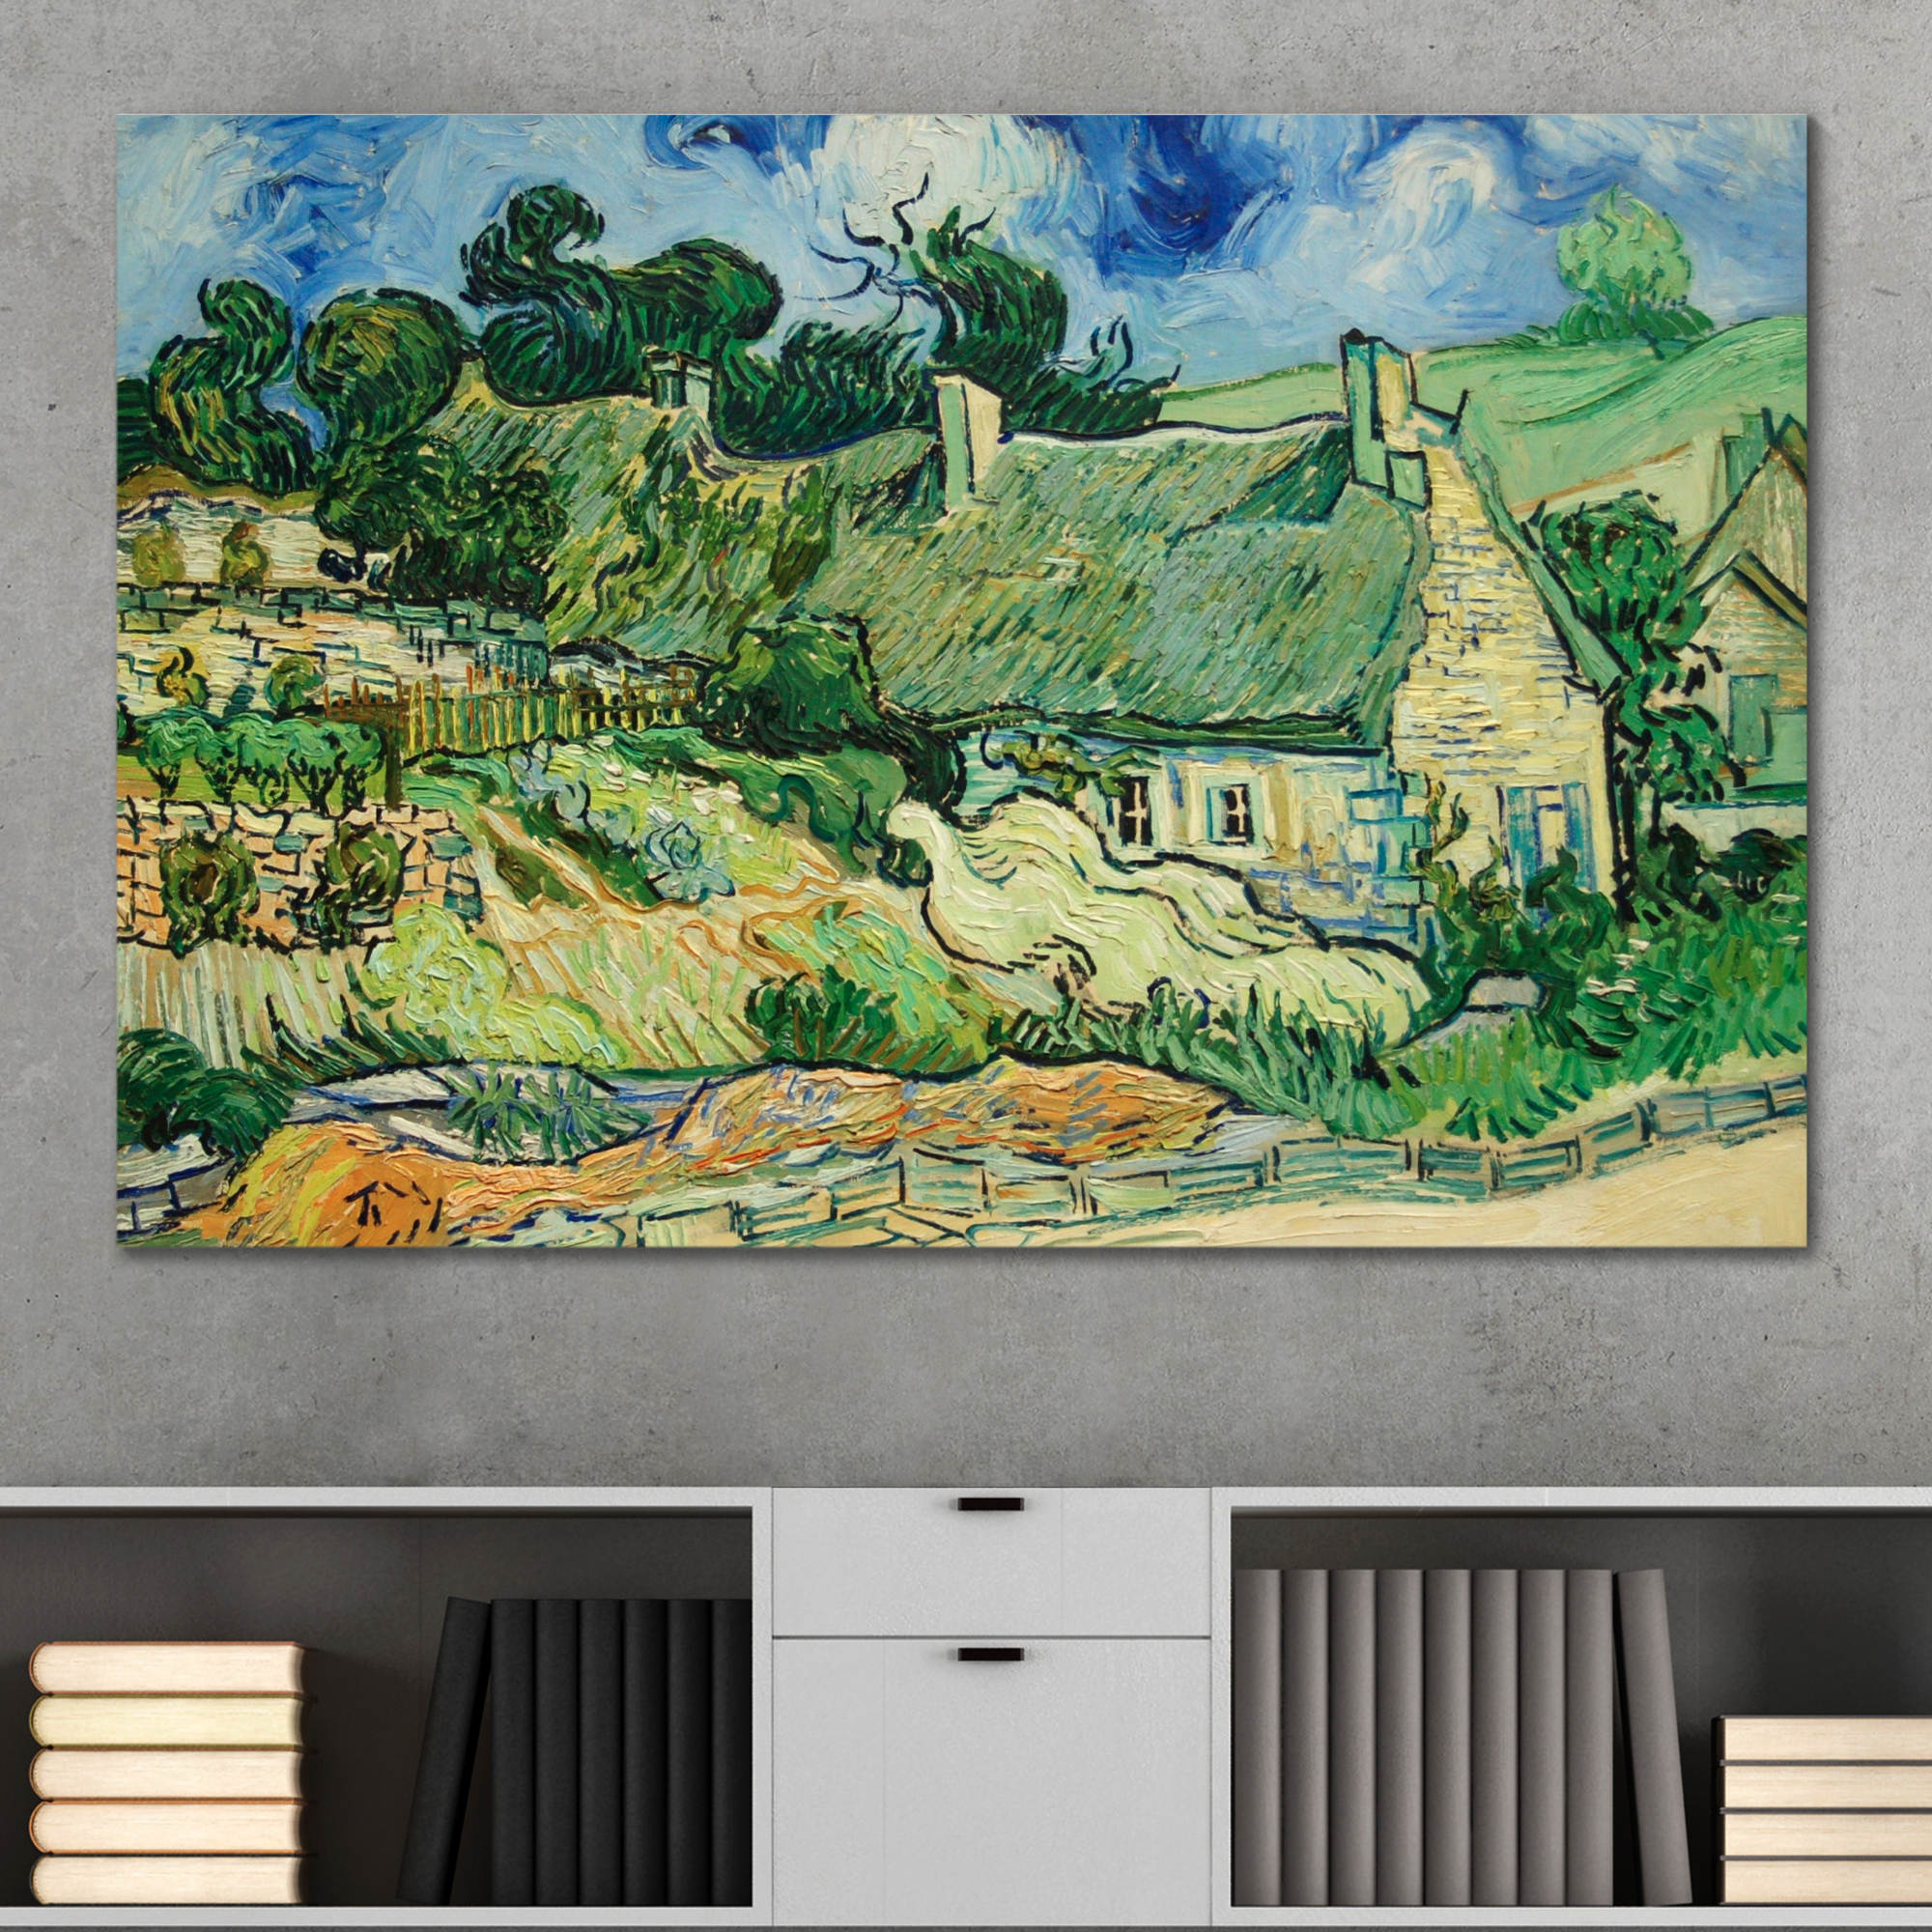 Thatched Cottages at Cordeville by Vincent Van Gogh - Canvas Print Wall Art Famous Painting Reproduction - 12